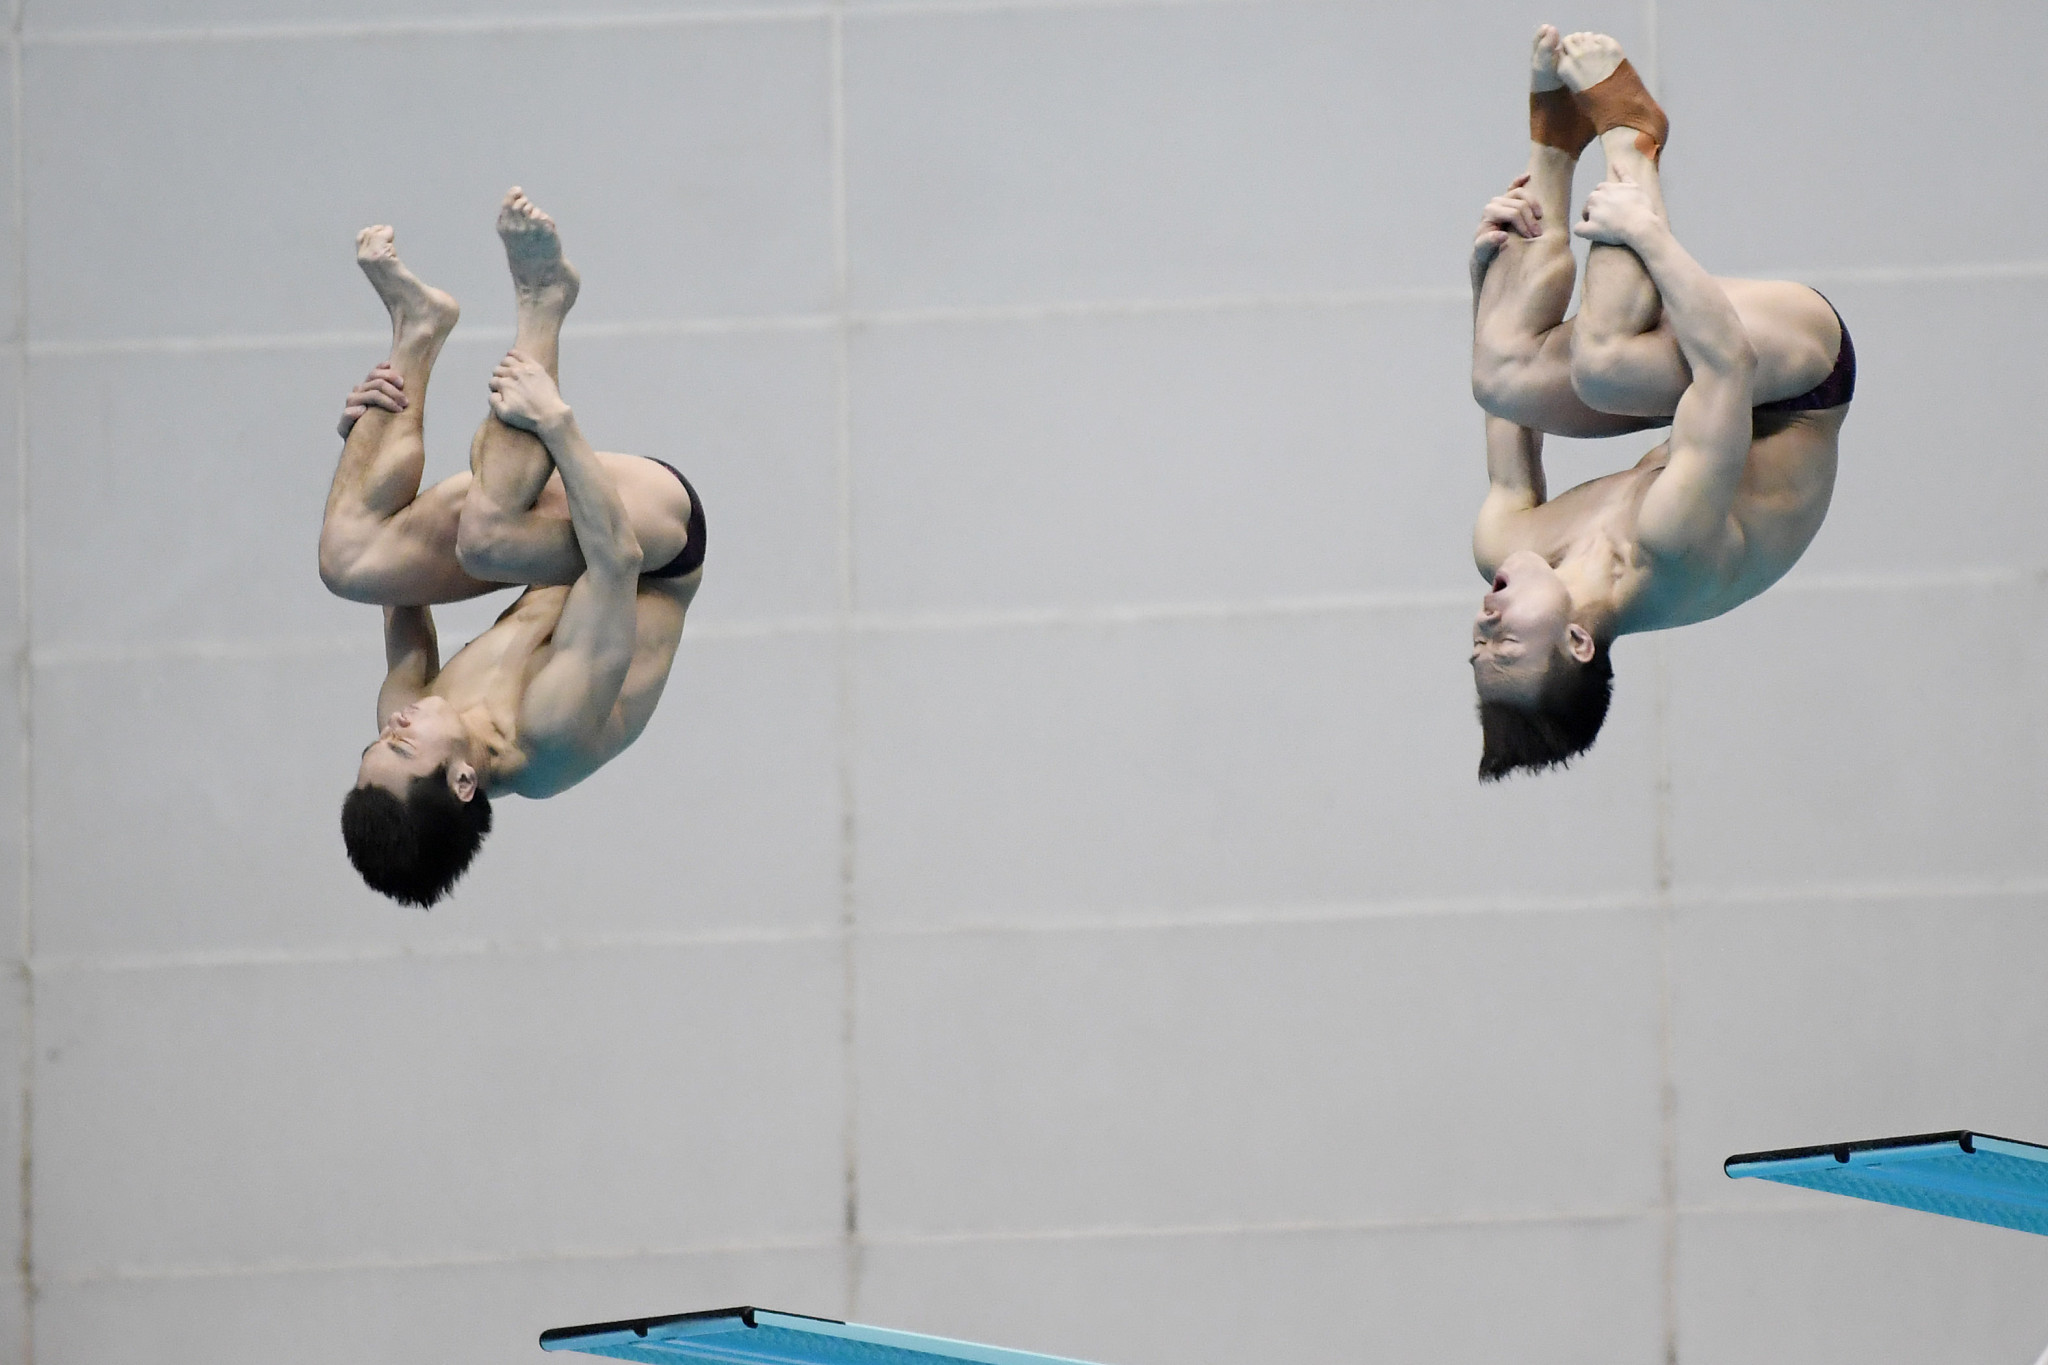 China's Cao Yuan and Xie Siyi were a cut above their opponents in the men's synchronised 3m springboard event ©Getty Images